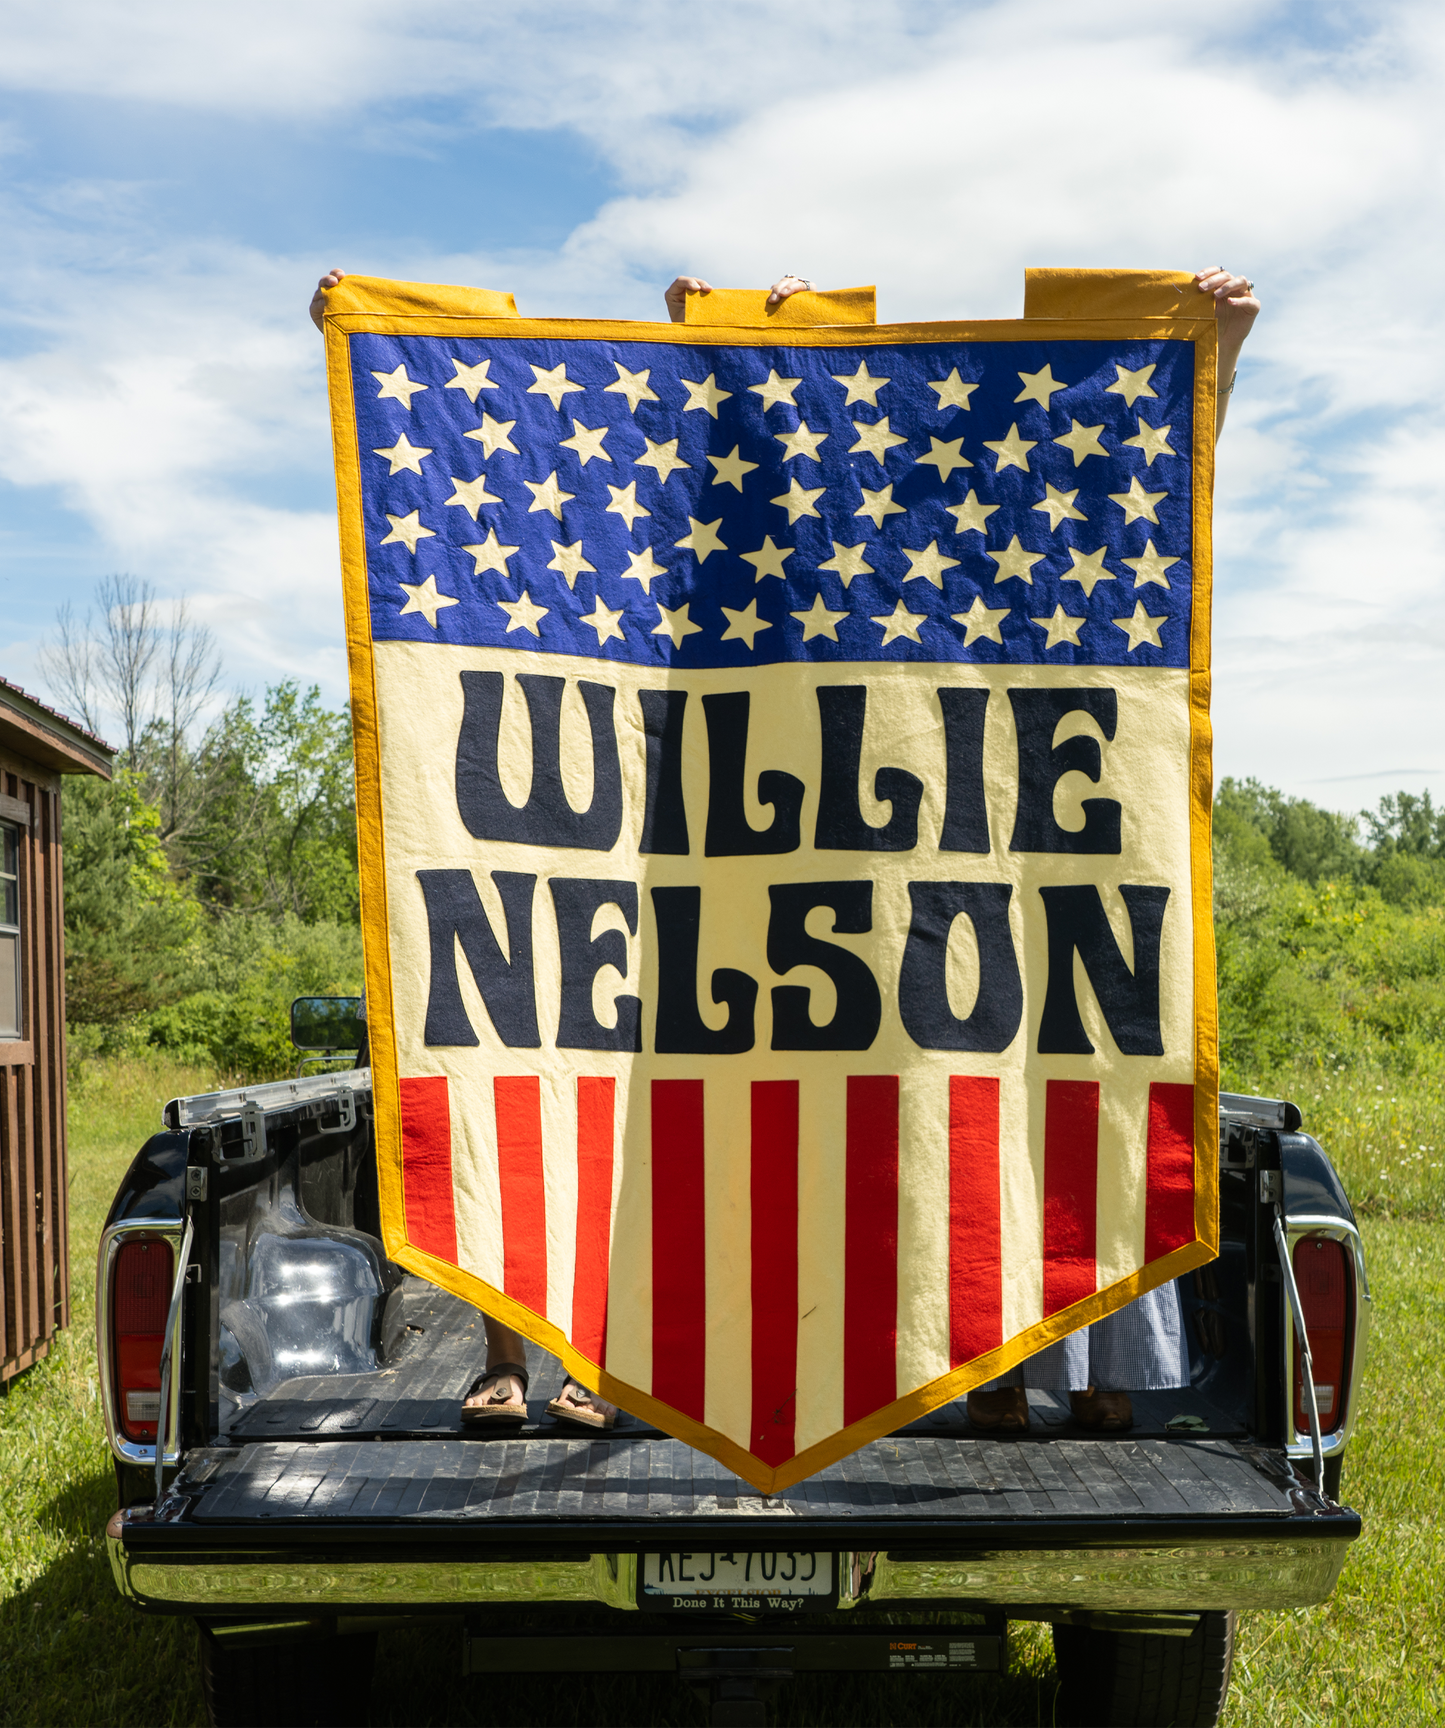 Stars and Stripes Willie Nelson Championship Banner • Willie Nelson x Oxford Pennant